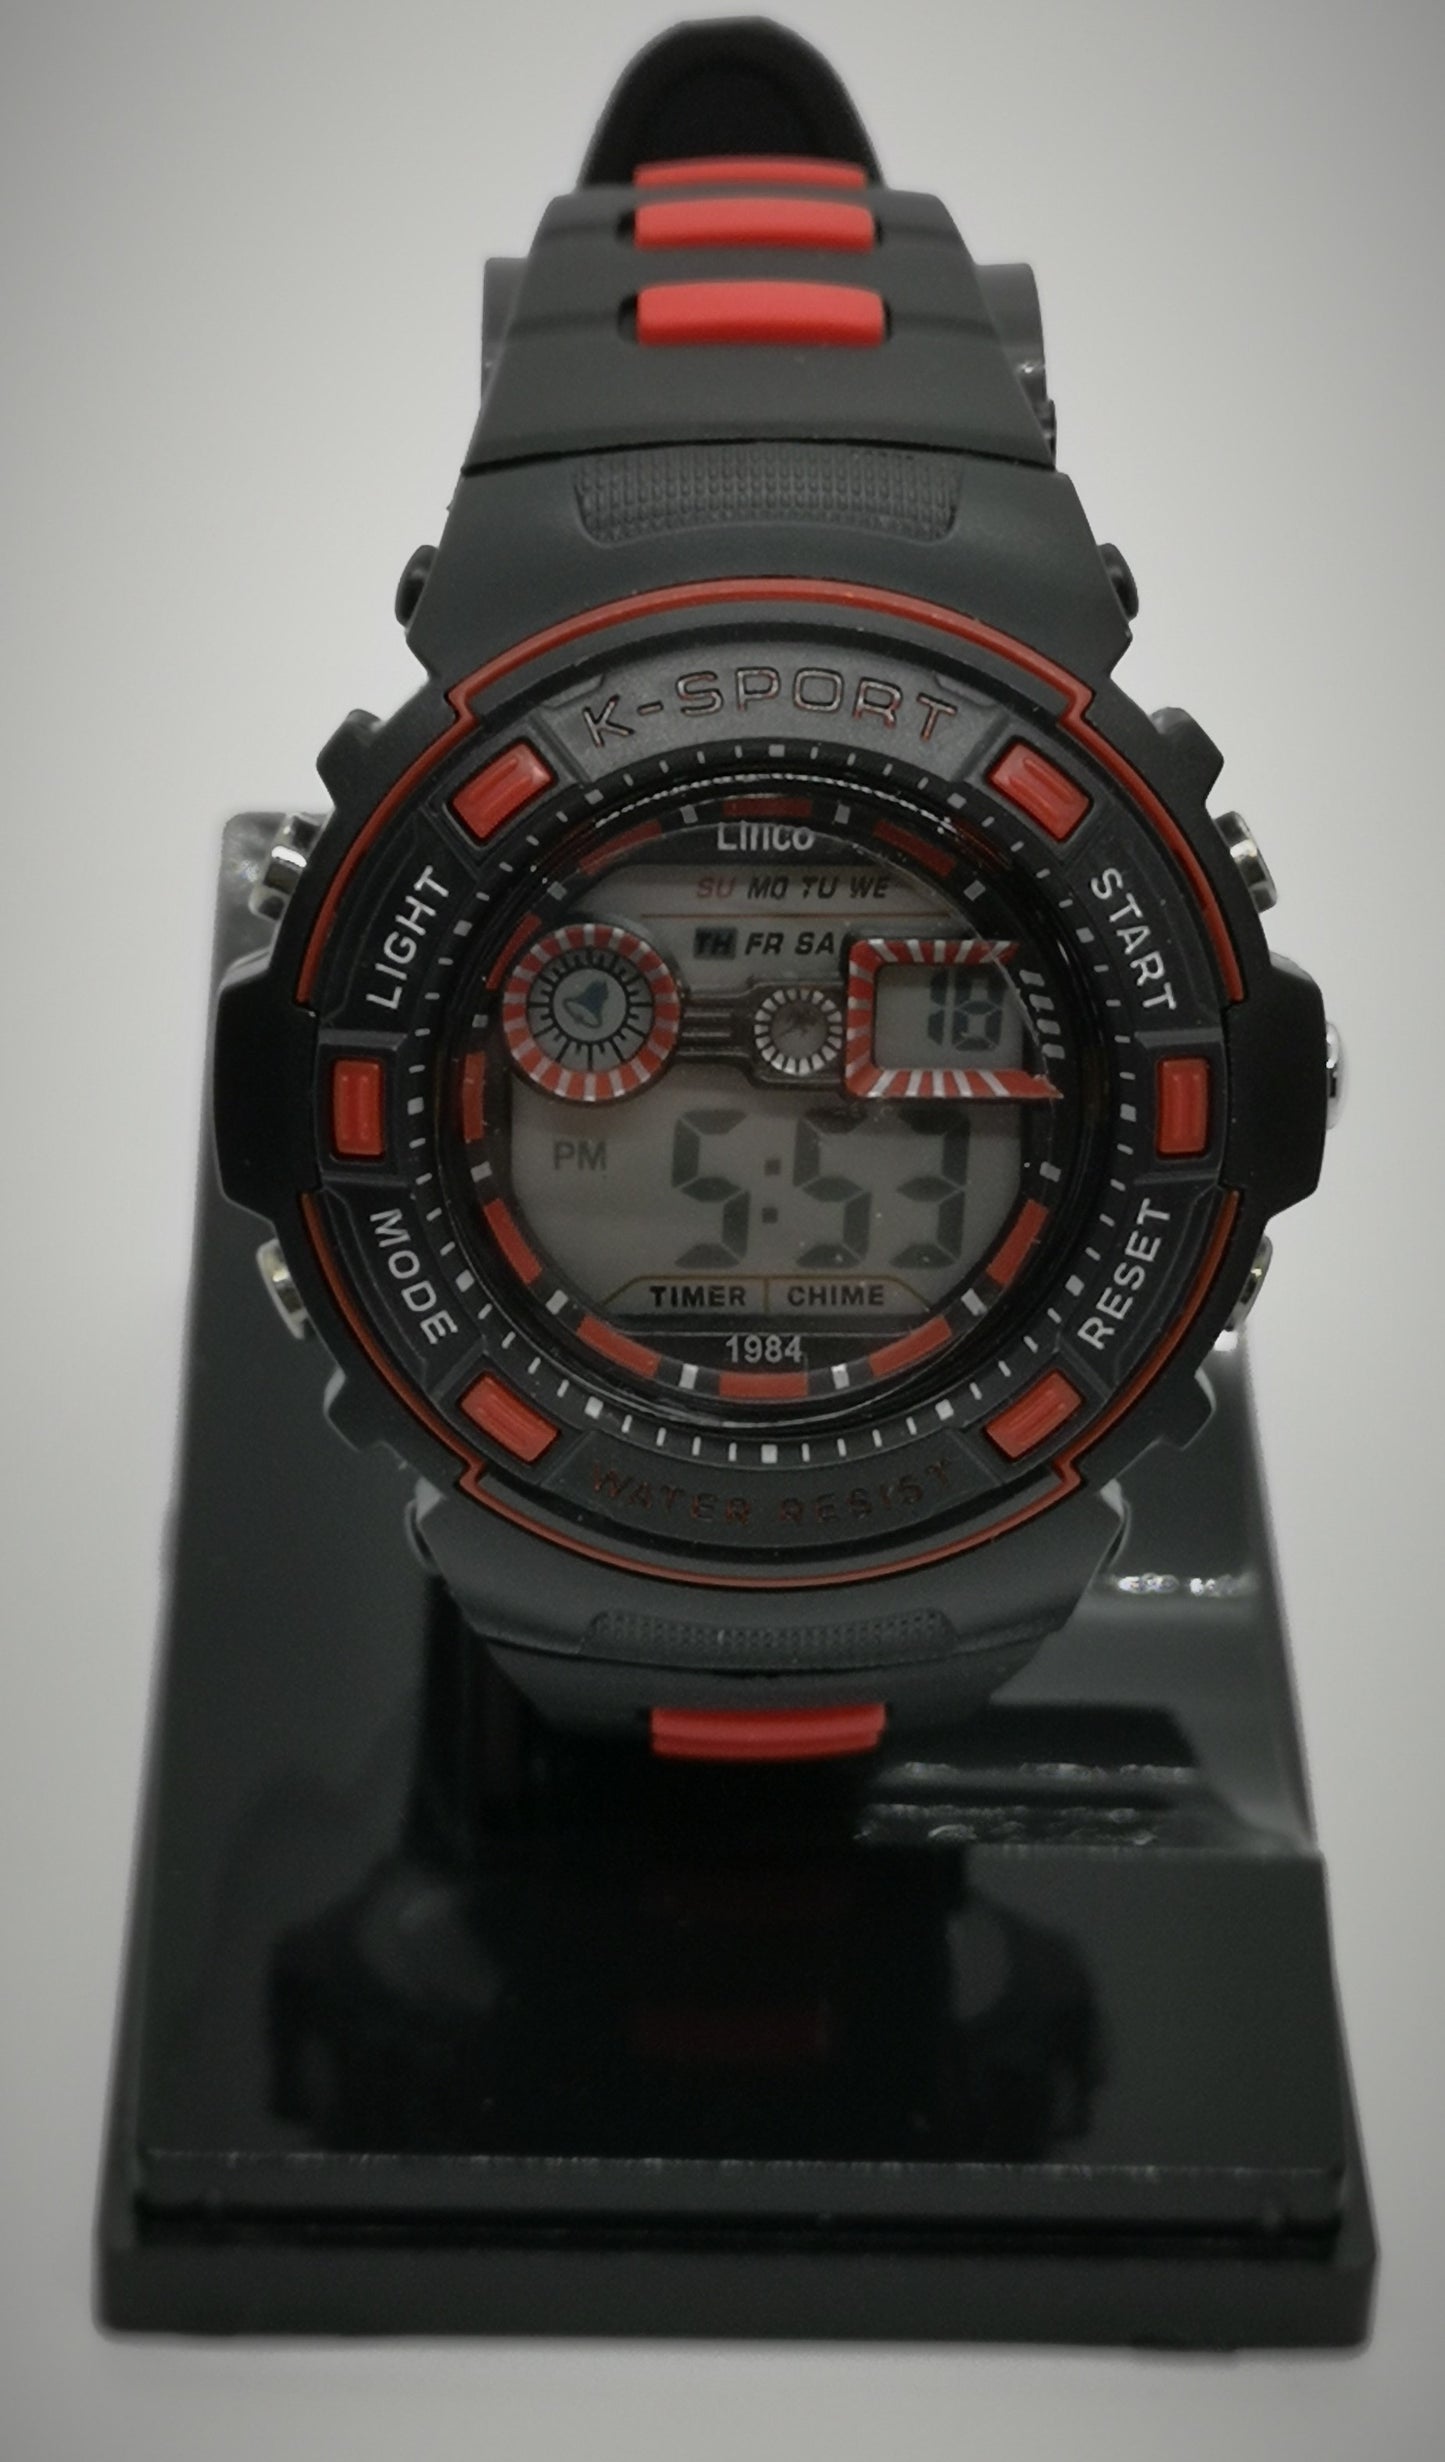 Digital red and black small 3.5cm face water resistant